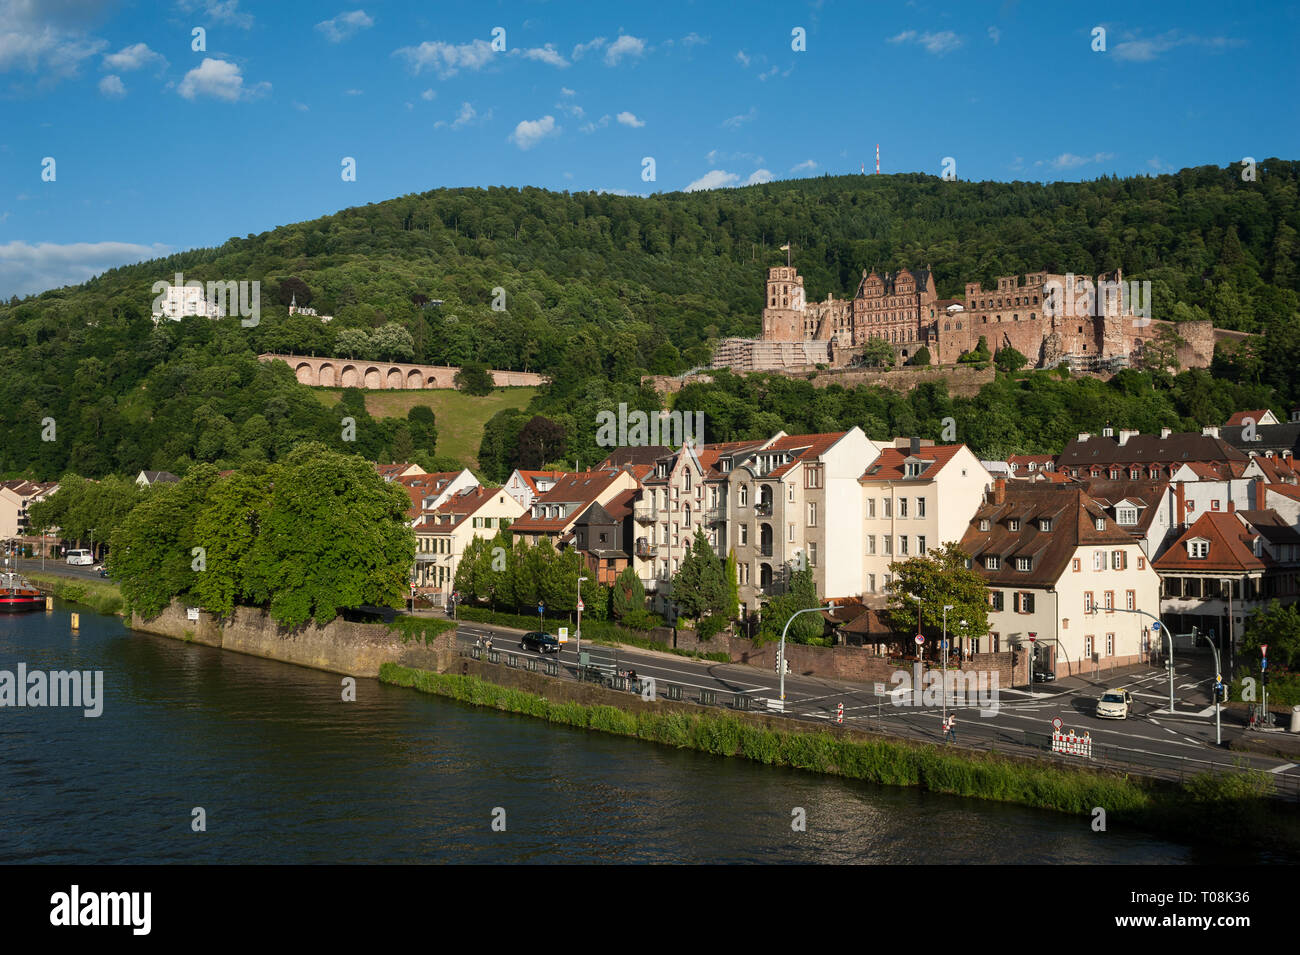 07.06.2017, Heidelberg, Baden-Wuerttemberg, Germany - View to the old town, the Neckar river and the Heidelberg Castle, the landmark of the city. 0SL1 Stock Photo